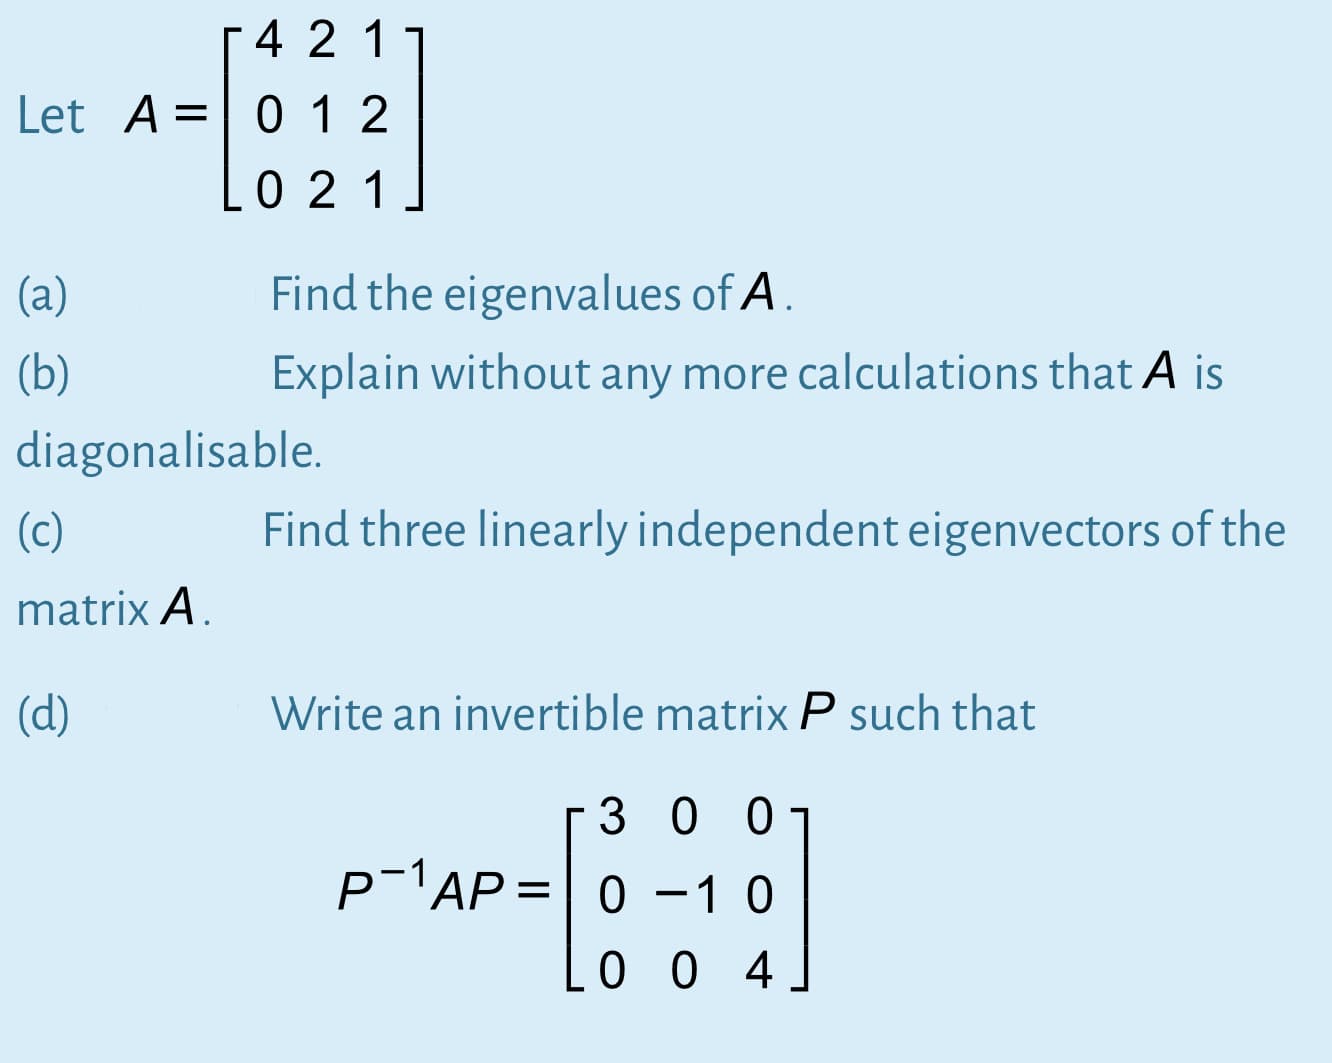 4 2 1
Let A= 0 1 2
0 21
(a)
Find the eigenvalues of A.
(b)
Explain without any more calculations that A is
diagonalisable.
(c)
Find three linearly independent eigenvectors of the
matrix A.
(d)
Write an invertible matrix P such that
3 00
p-1AP= 0 -1 0
||
0 0 4
